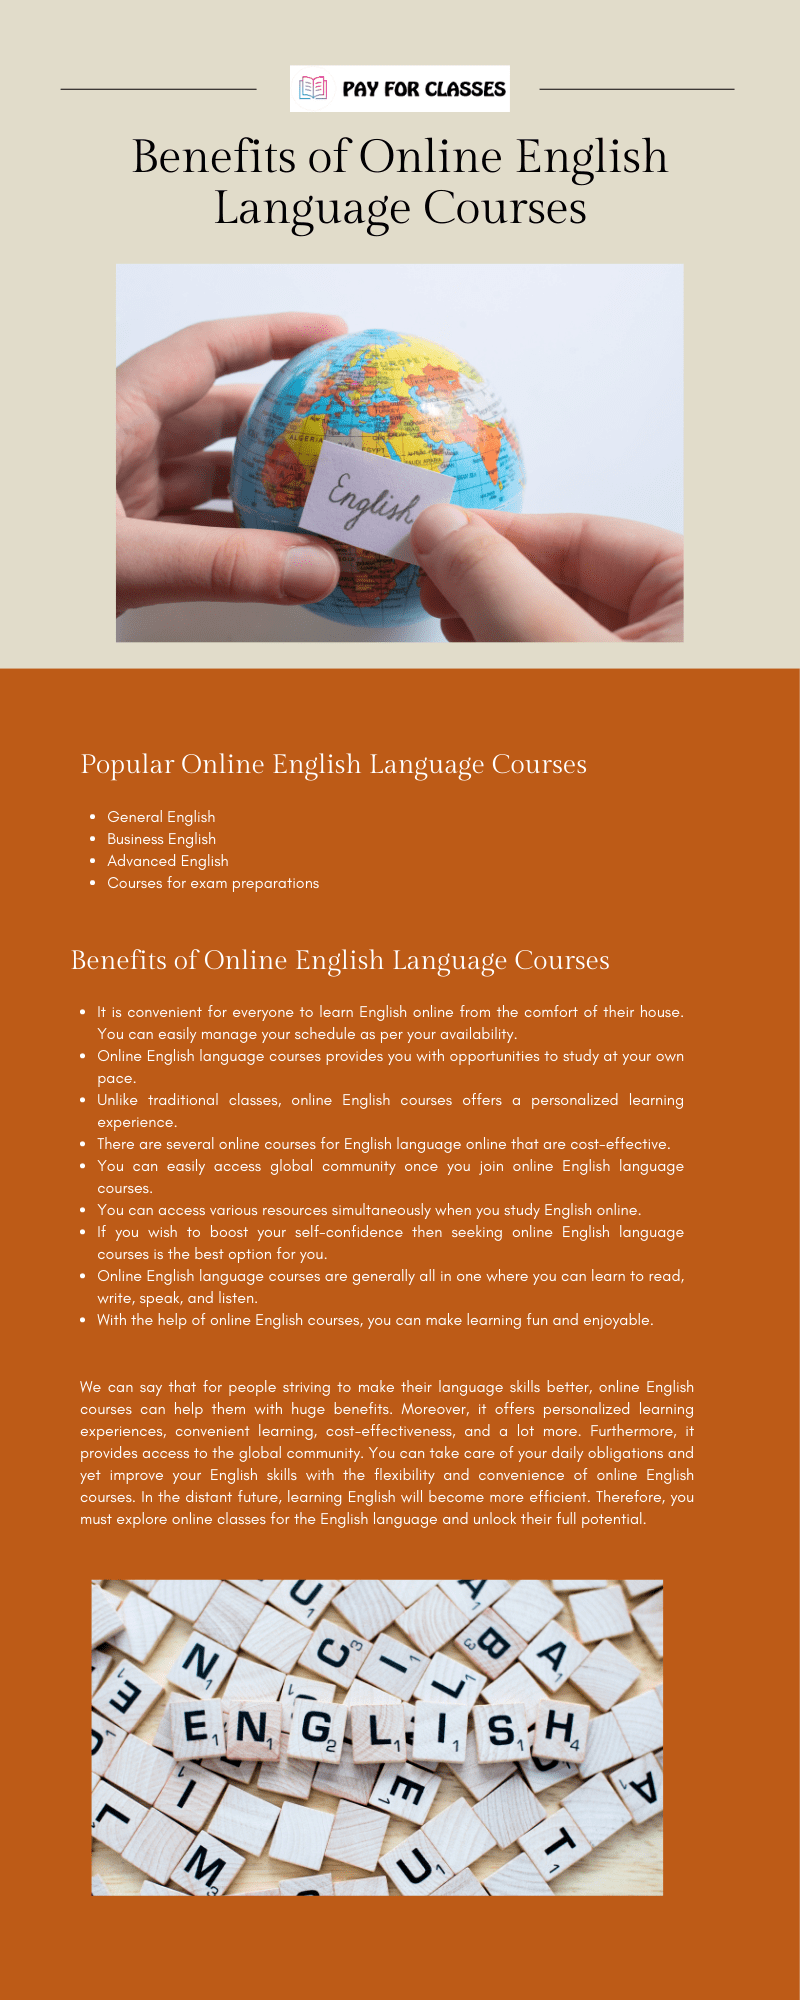 Benefits-of-Online-English-Language-Courses-2.png 